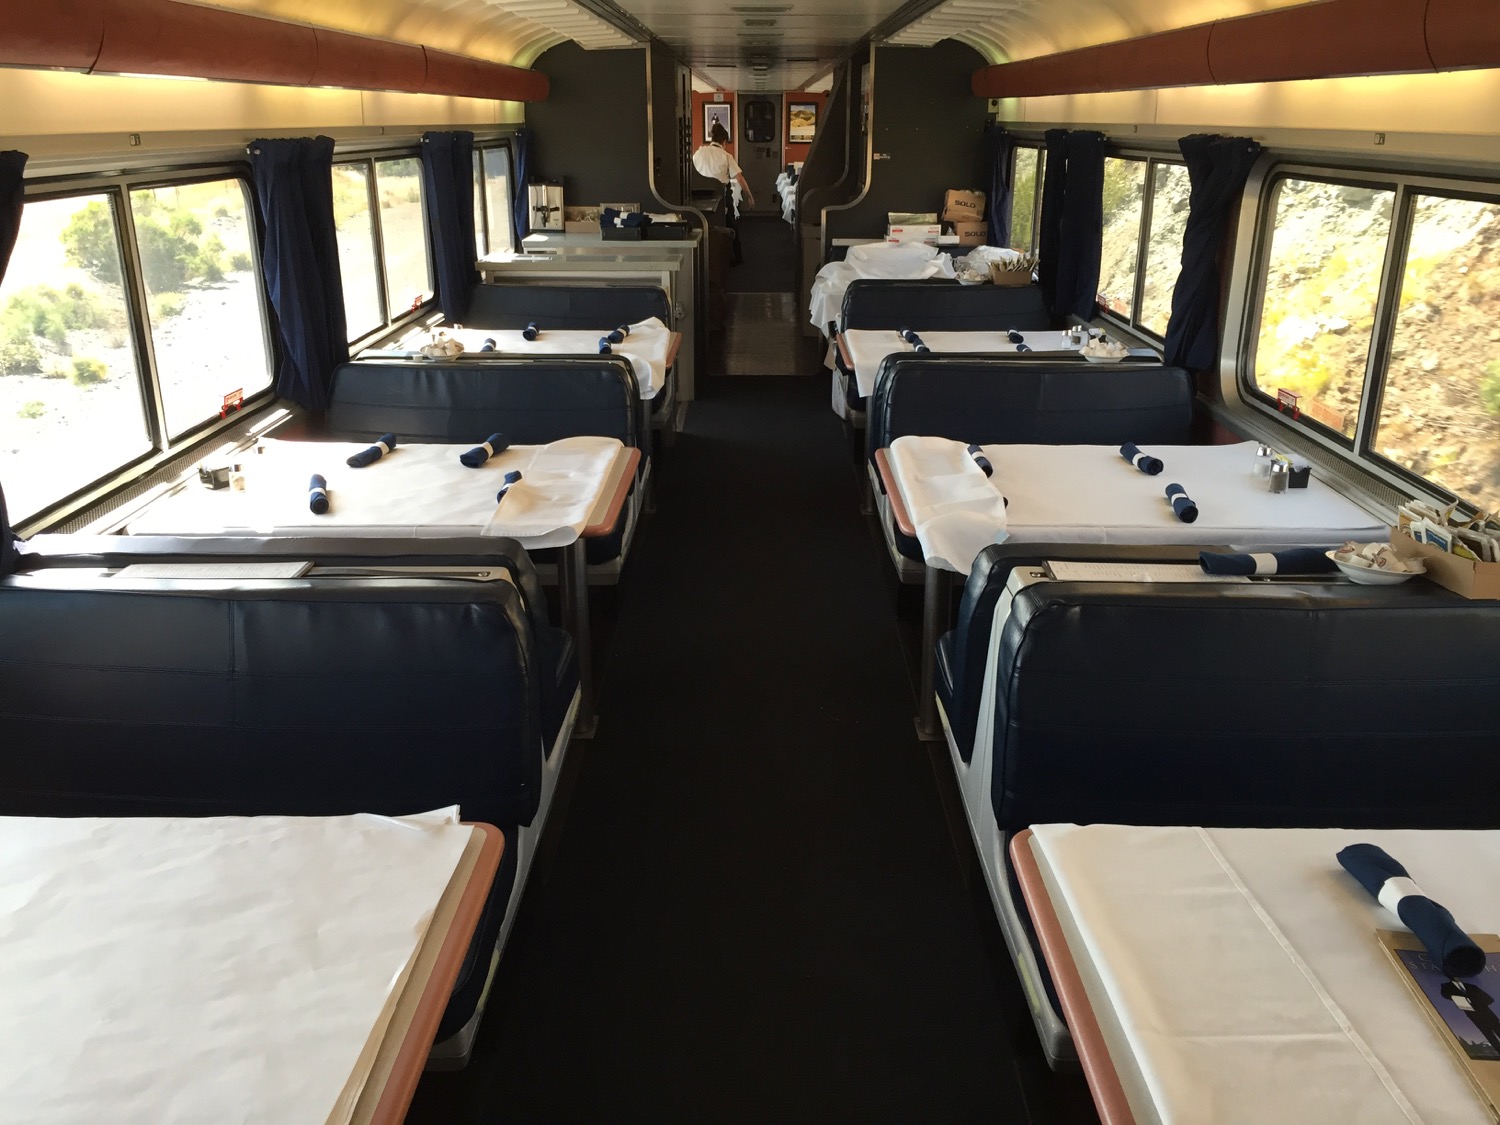 a dining room of a train